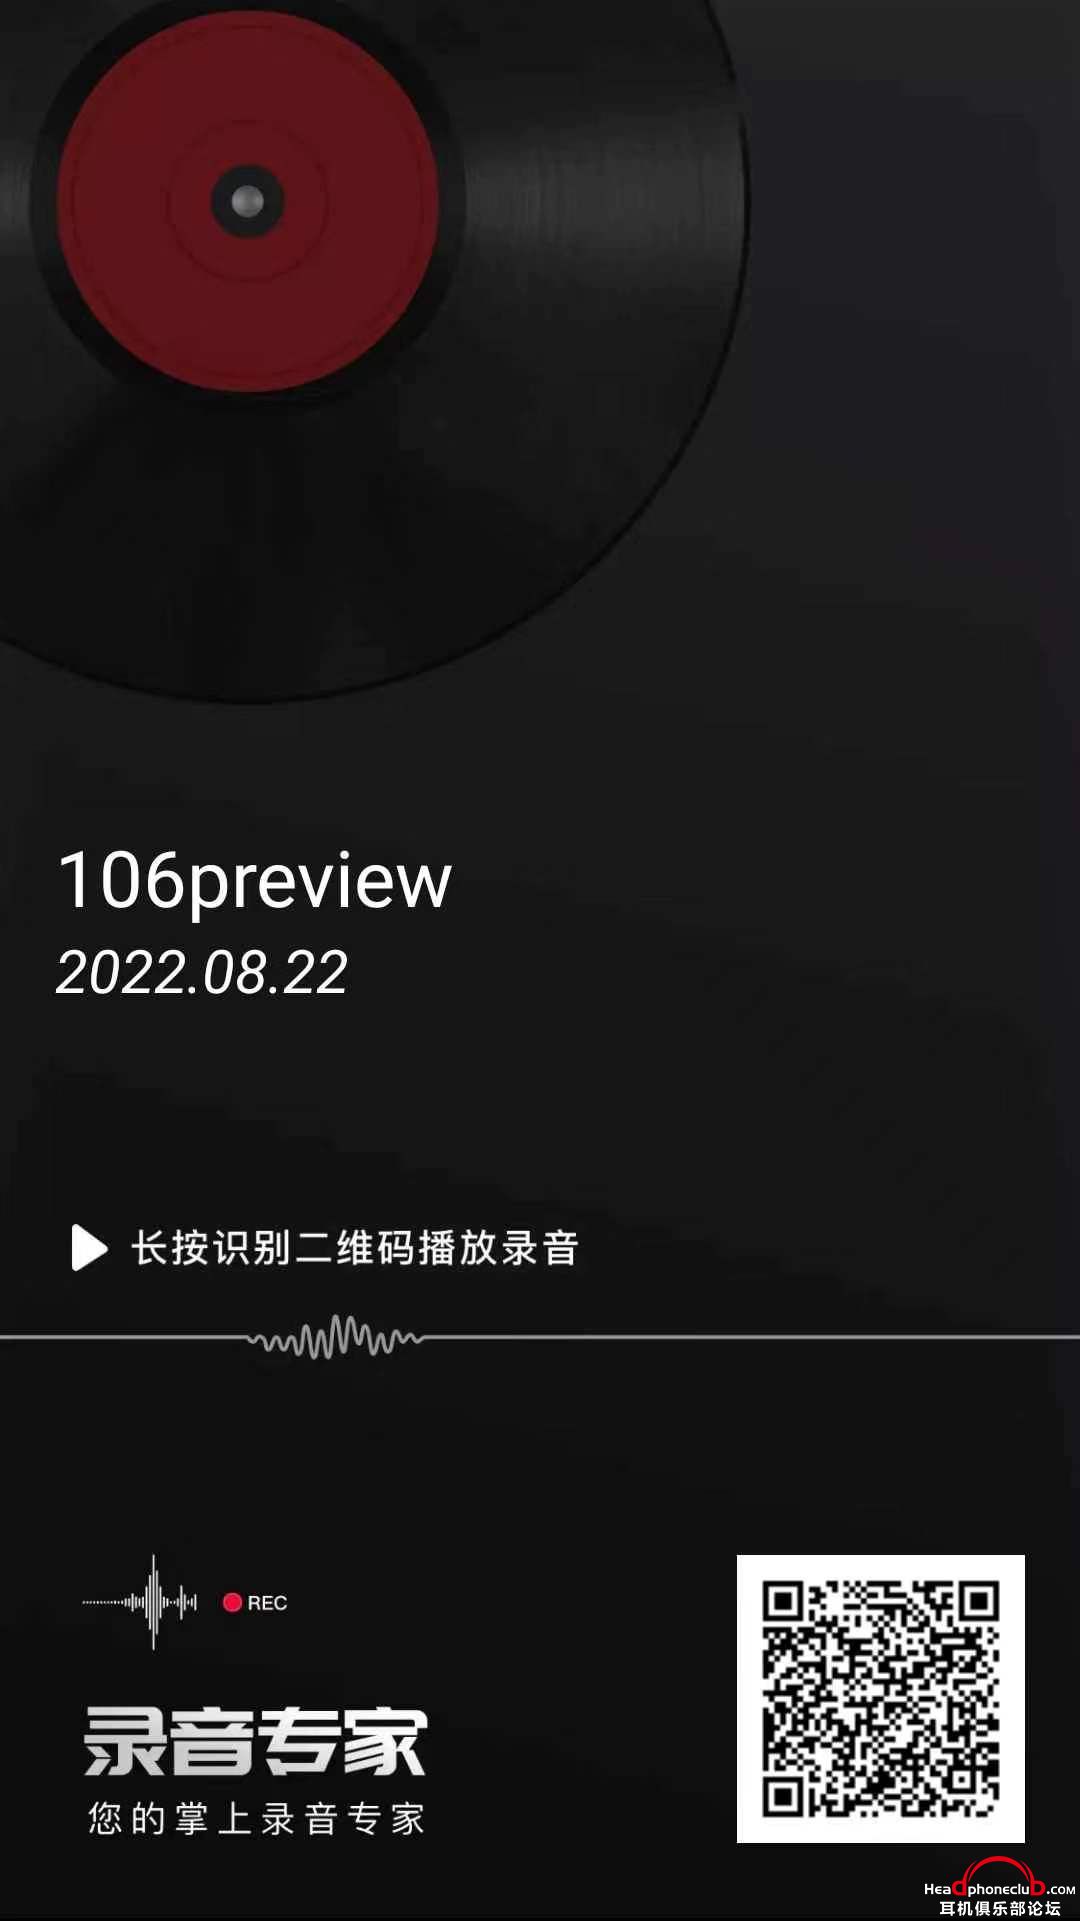 106preview asio